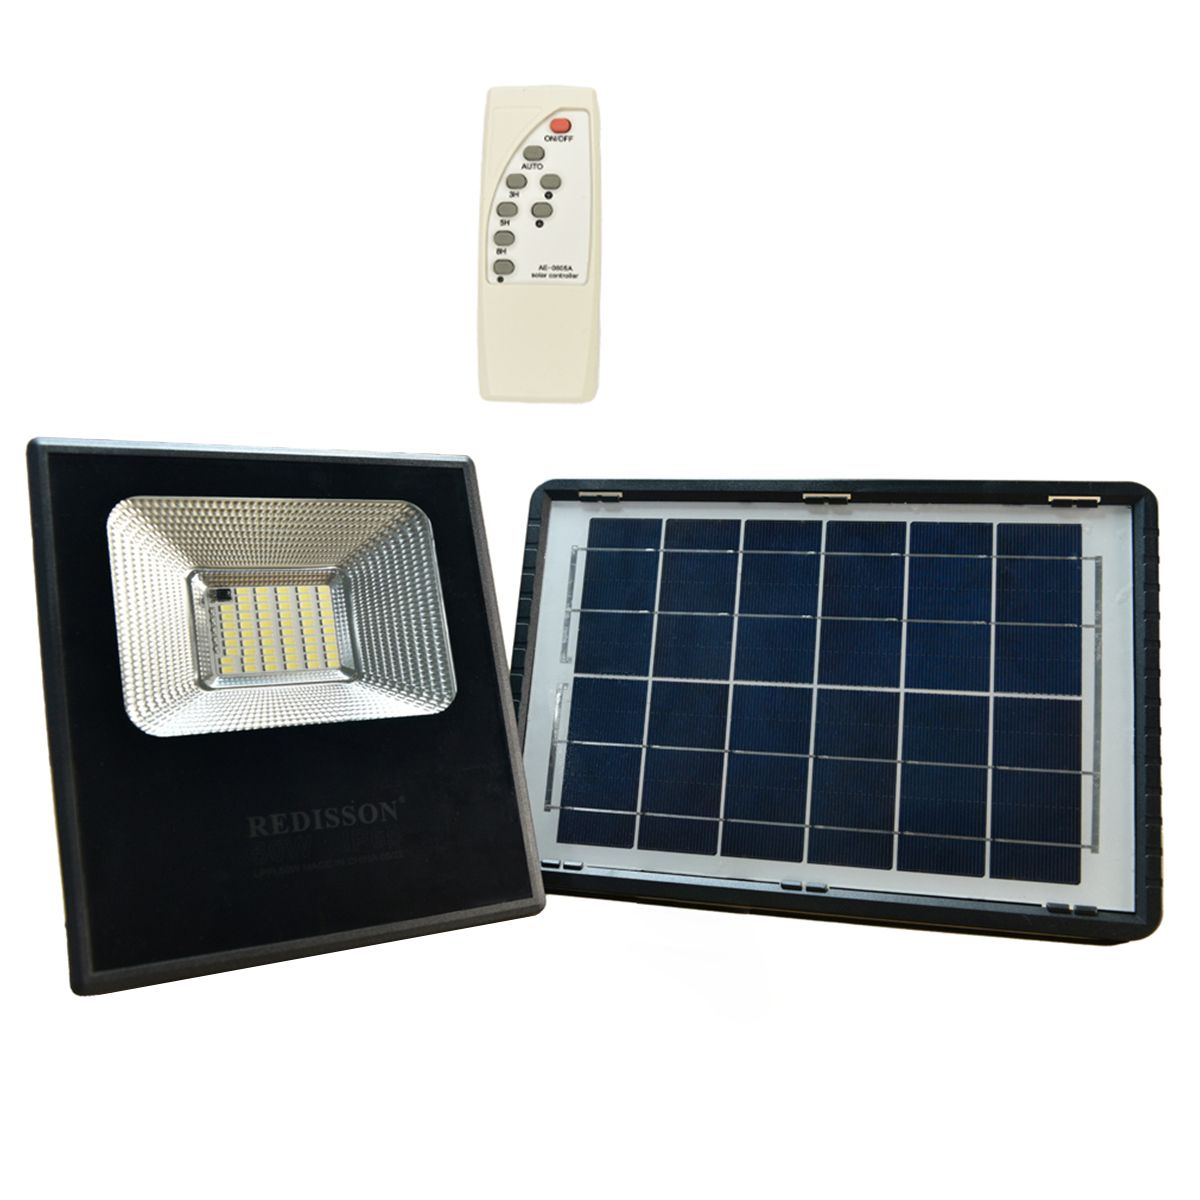 Redisson 50W LED Solar Flood Light with Remote control Shop Today. Get it  Tomorrow!